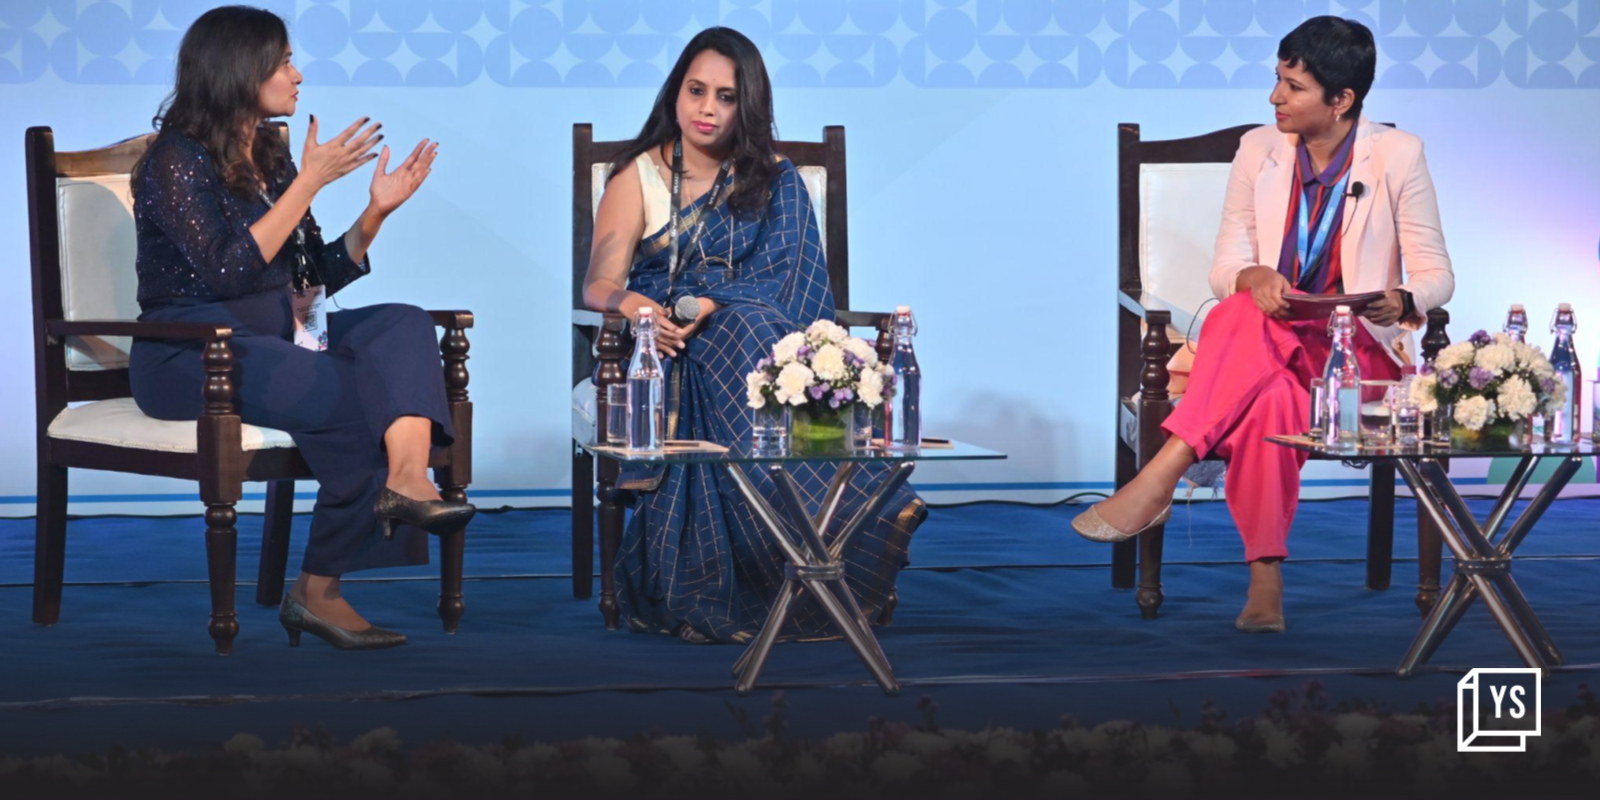 Flexibility is the key to keep women in workforce, say experts at SheSparks 2023